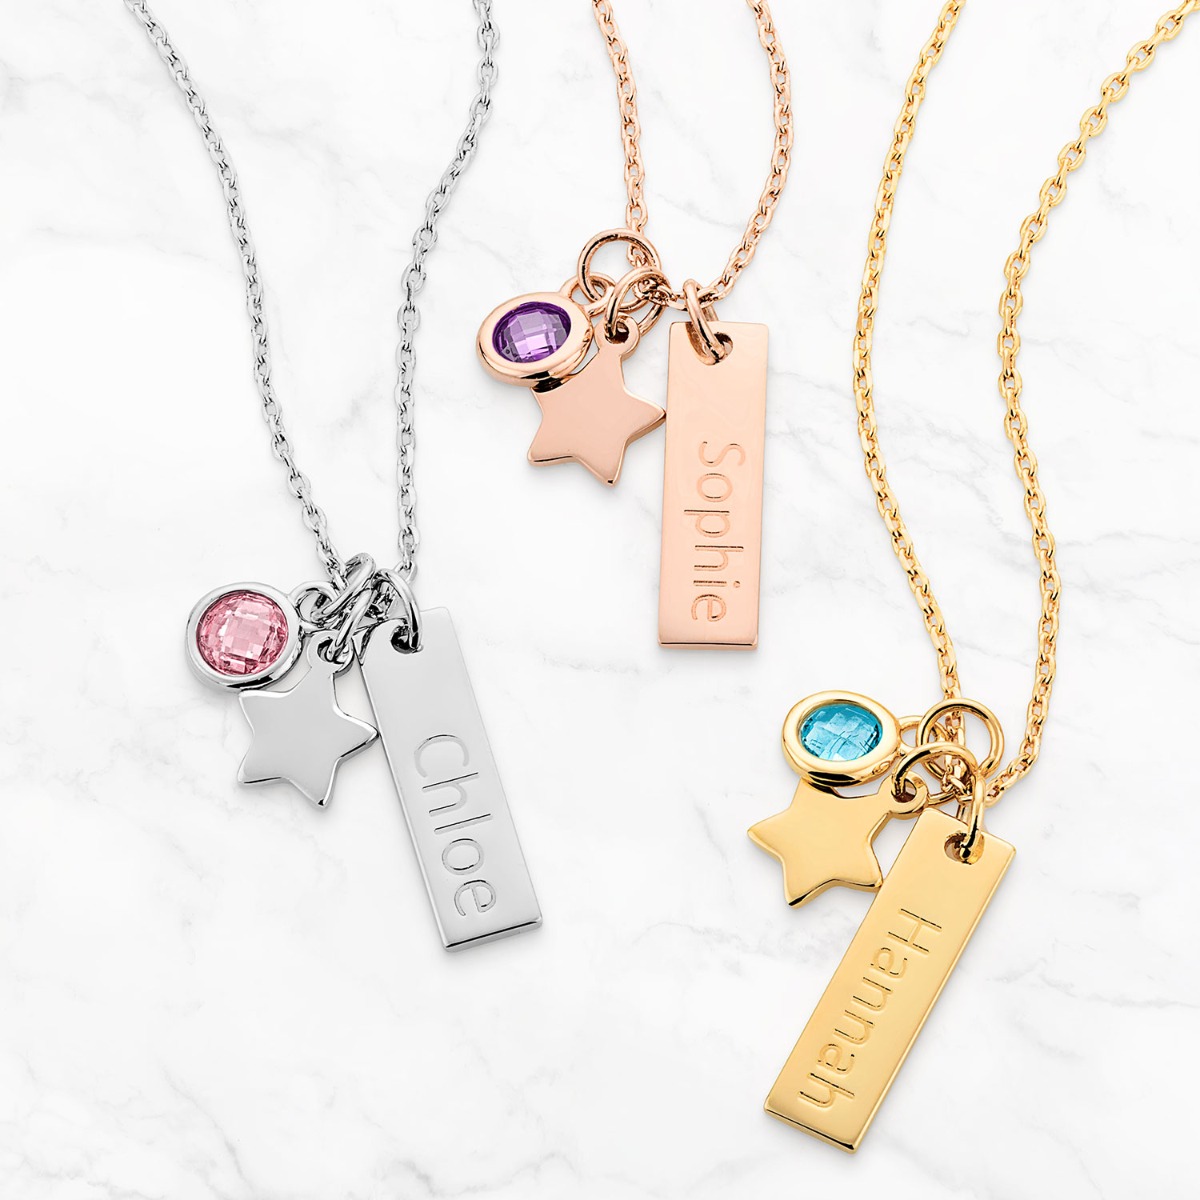 Star Bright Personalized Charm Necklace